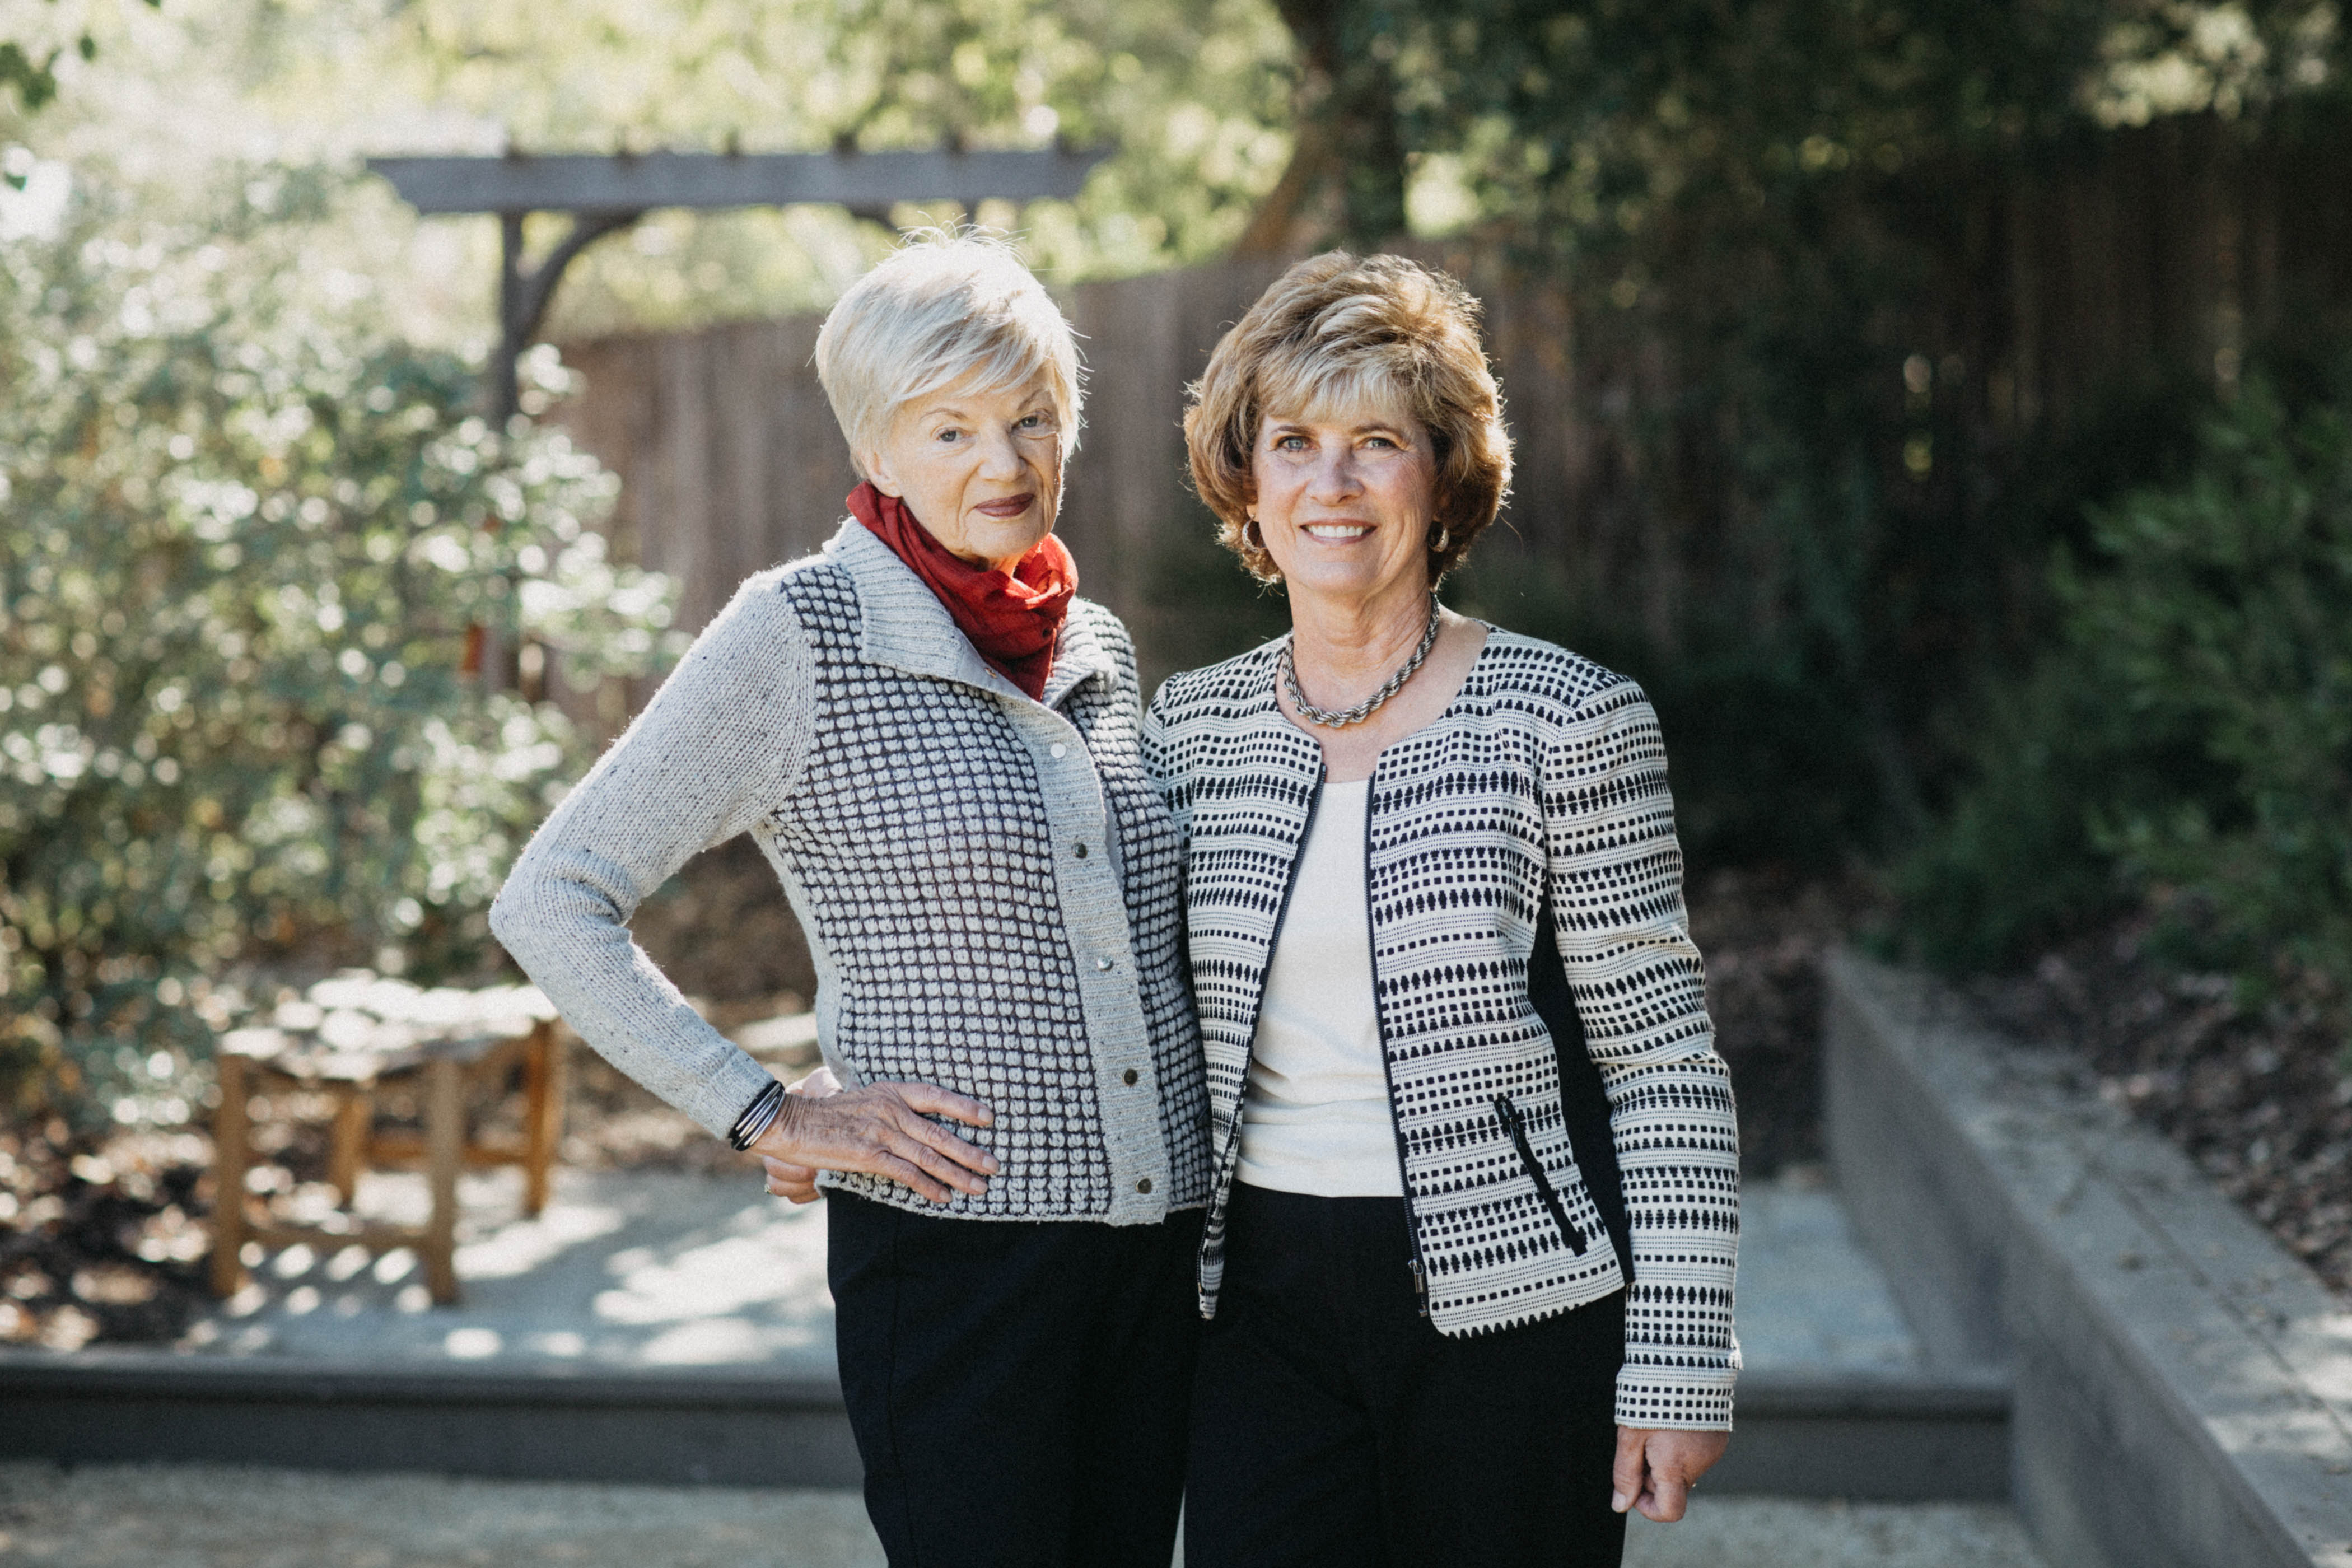 Ojai Women's Fund co-founders Karen Evenden and Peggy Russell.